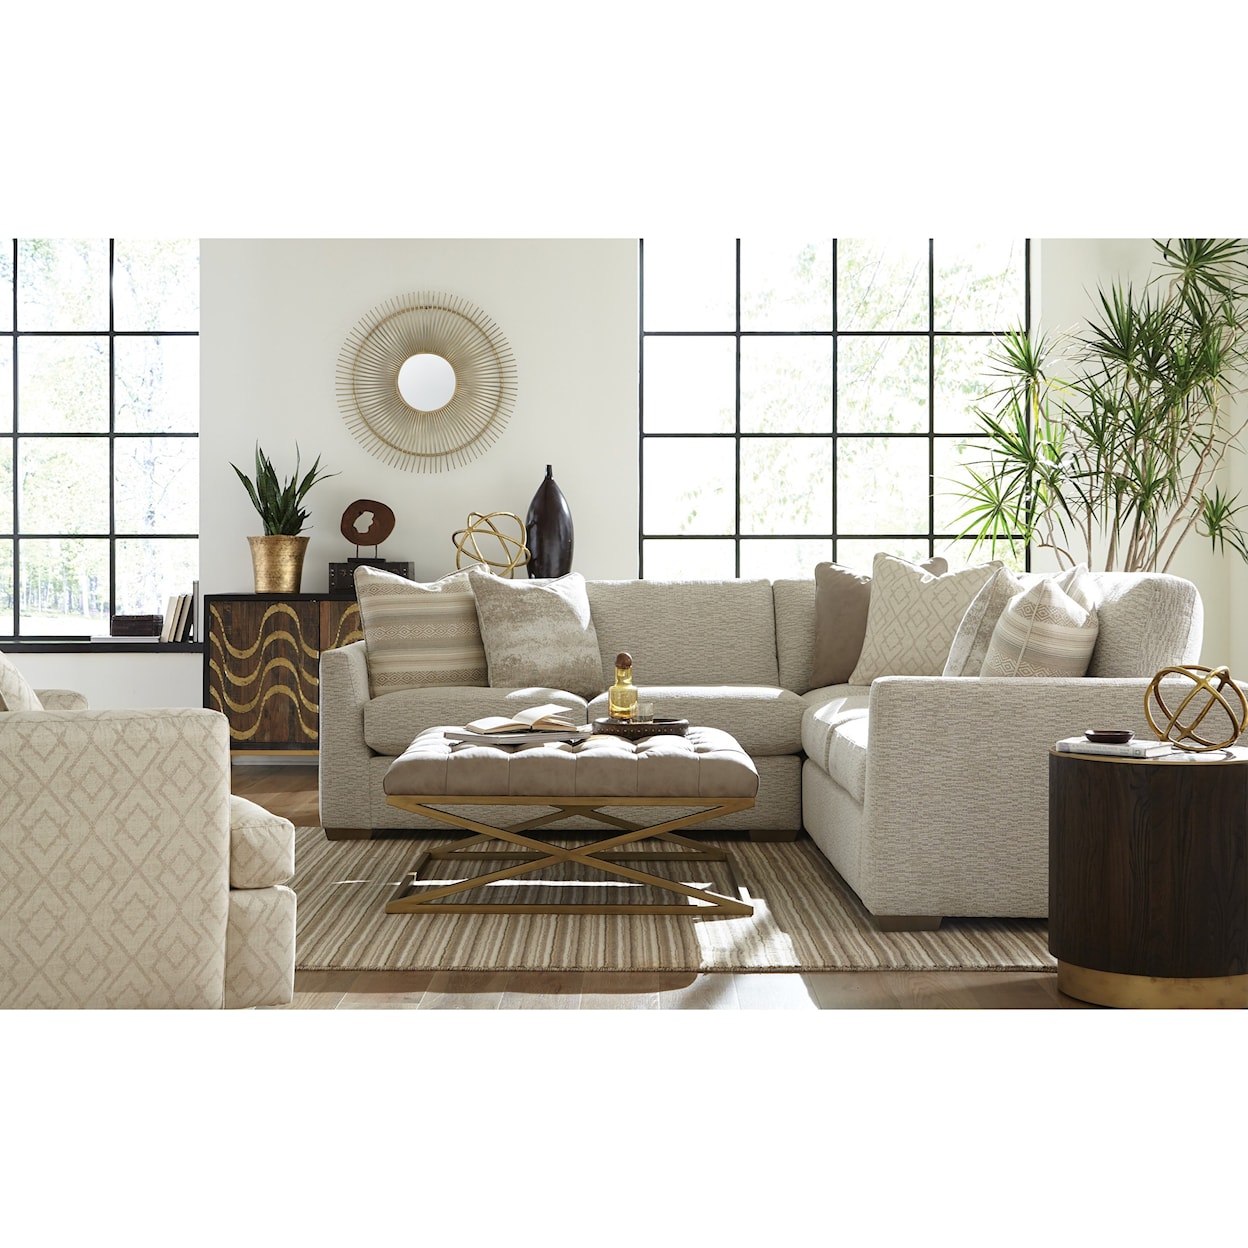 Hickory Craft 783950 4-Seat Sectional Sofa